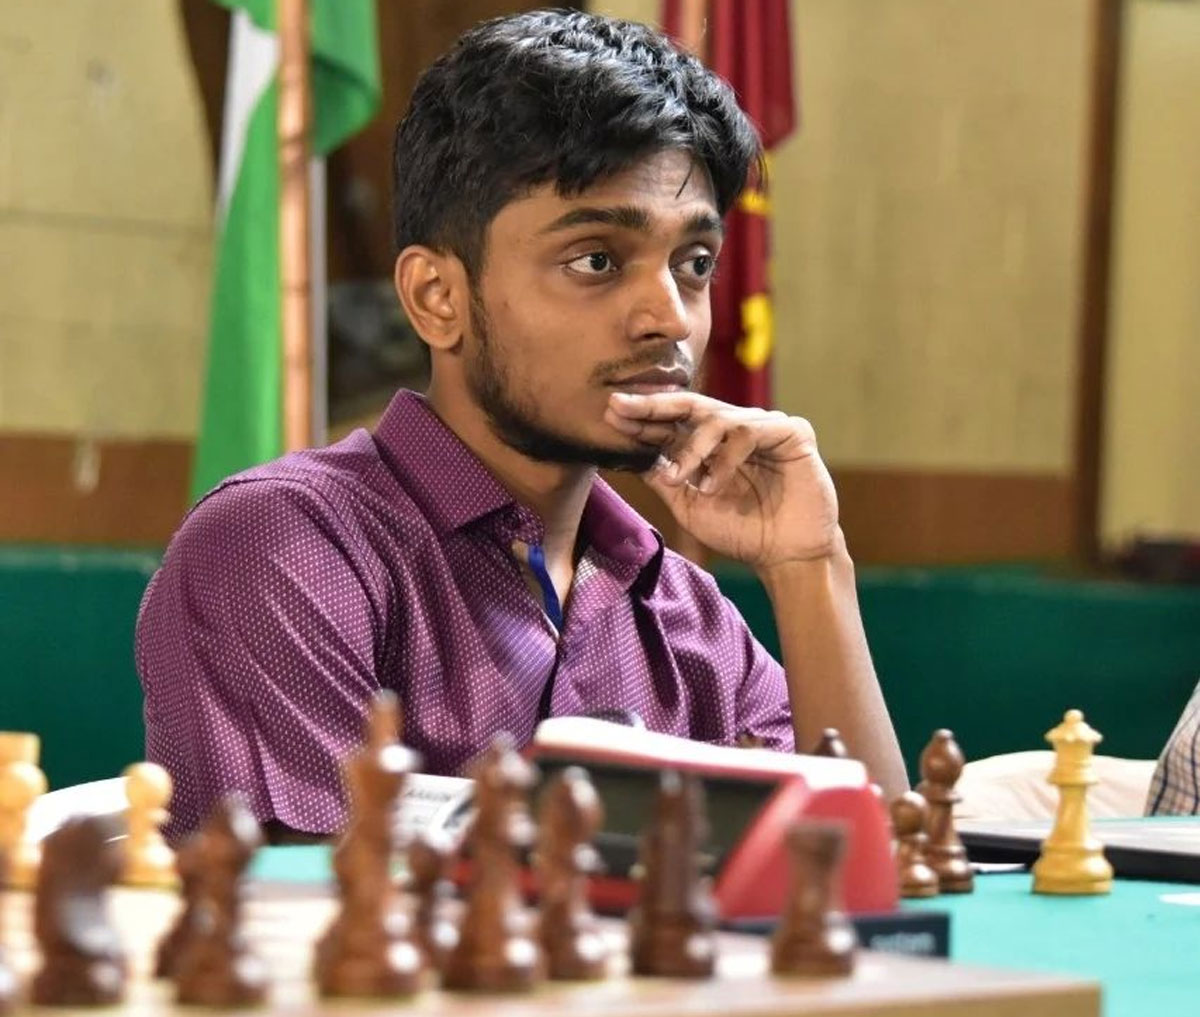 Chithambaram takes sole lead in Sharjah Masters chess